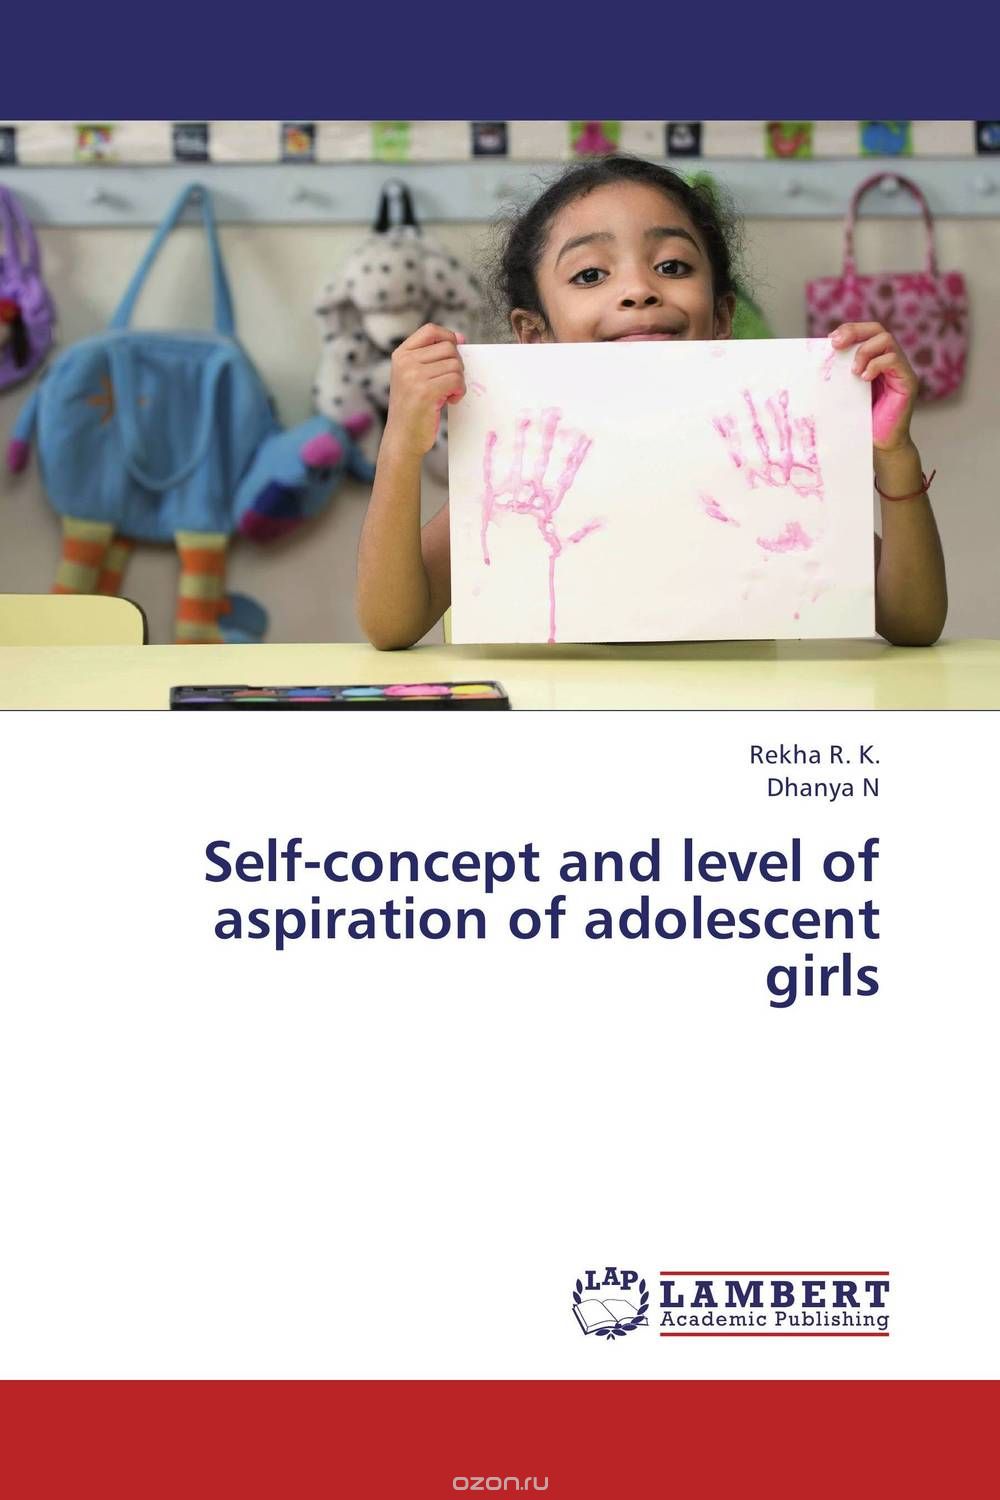 Self-concept and level of aspiration of adolescent girls